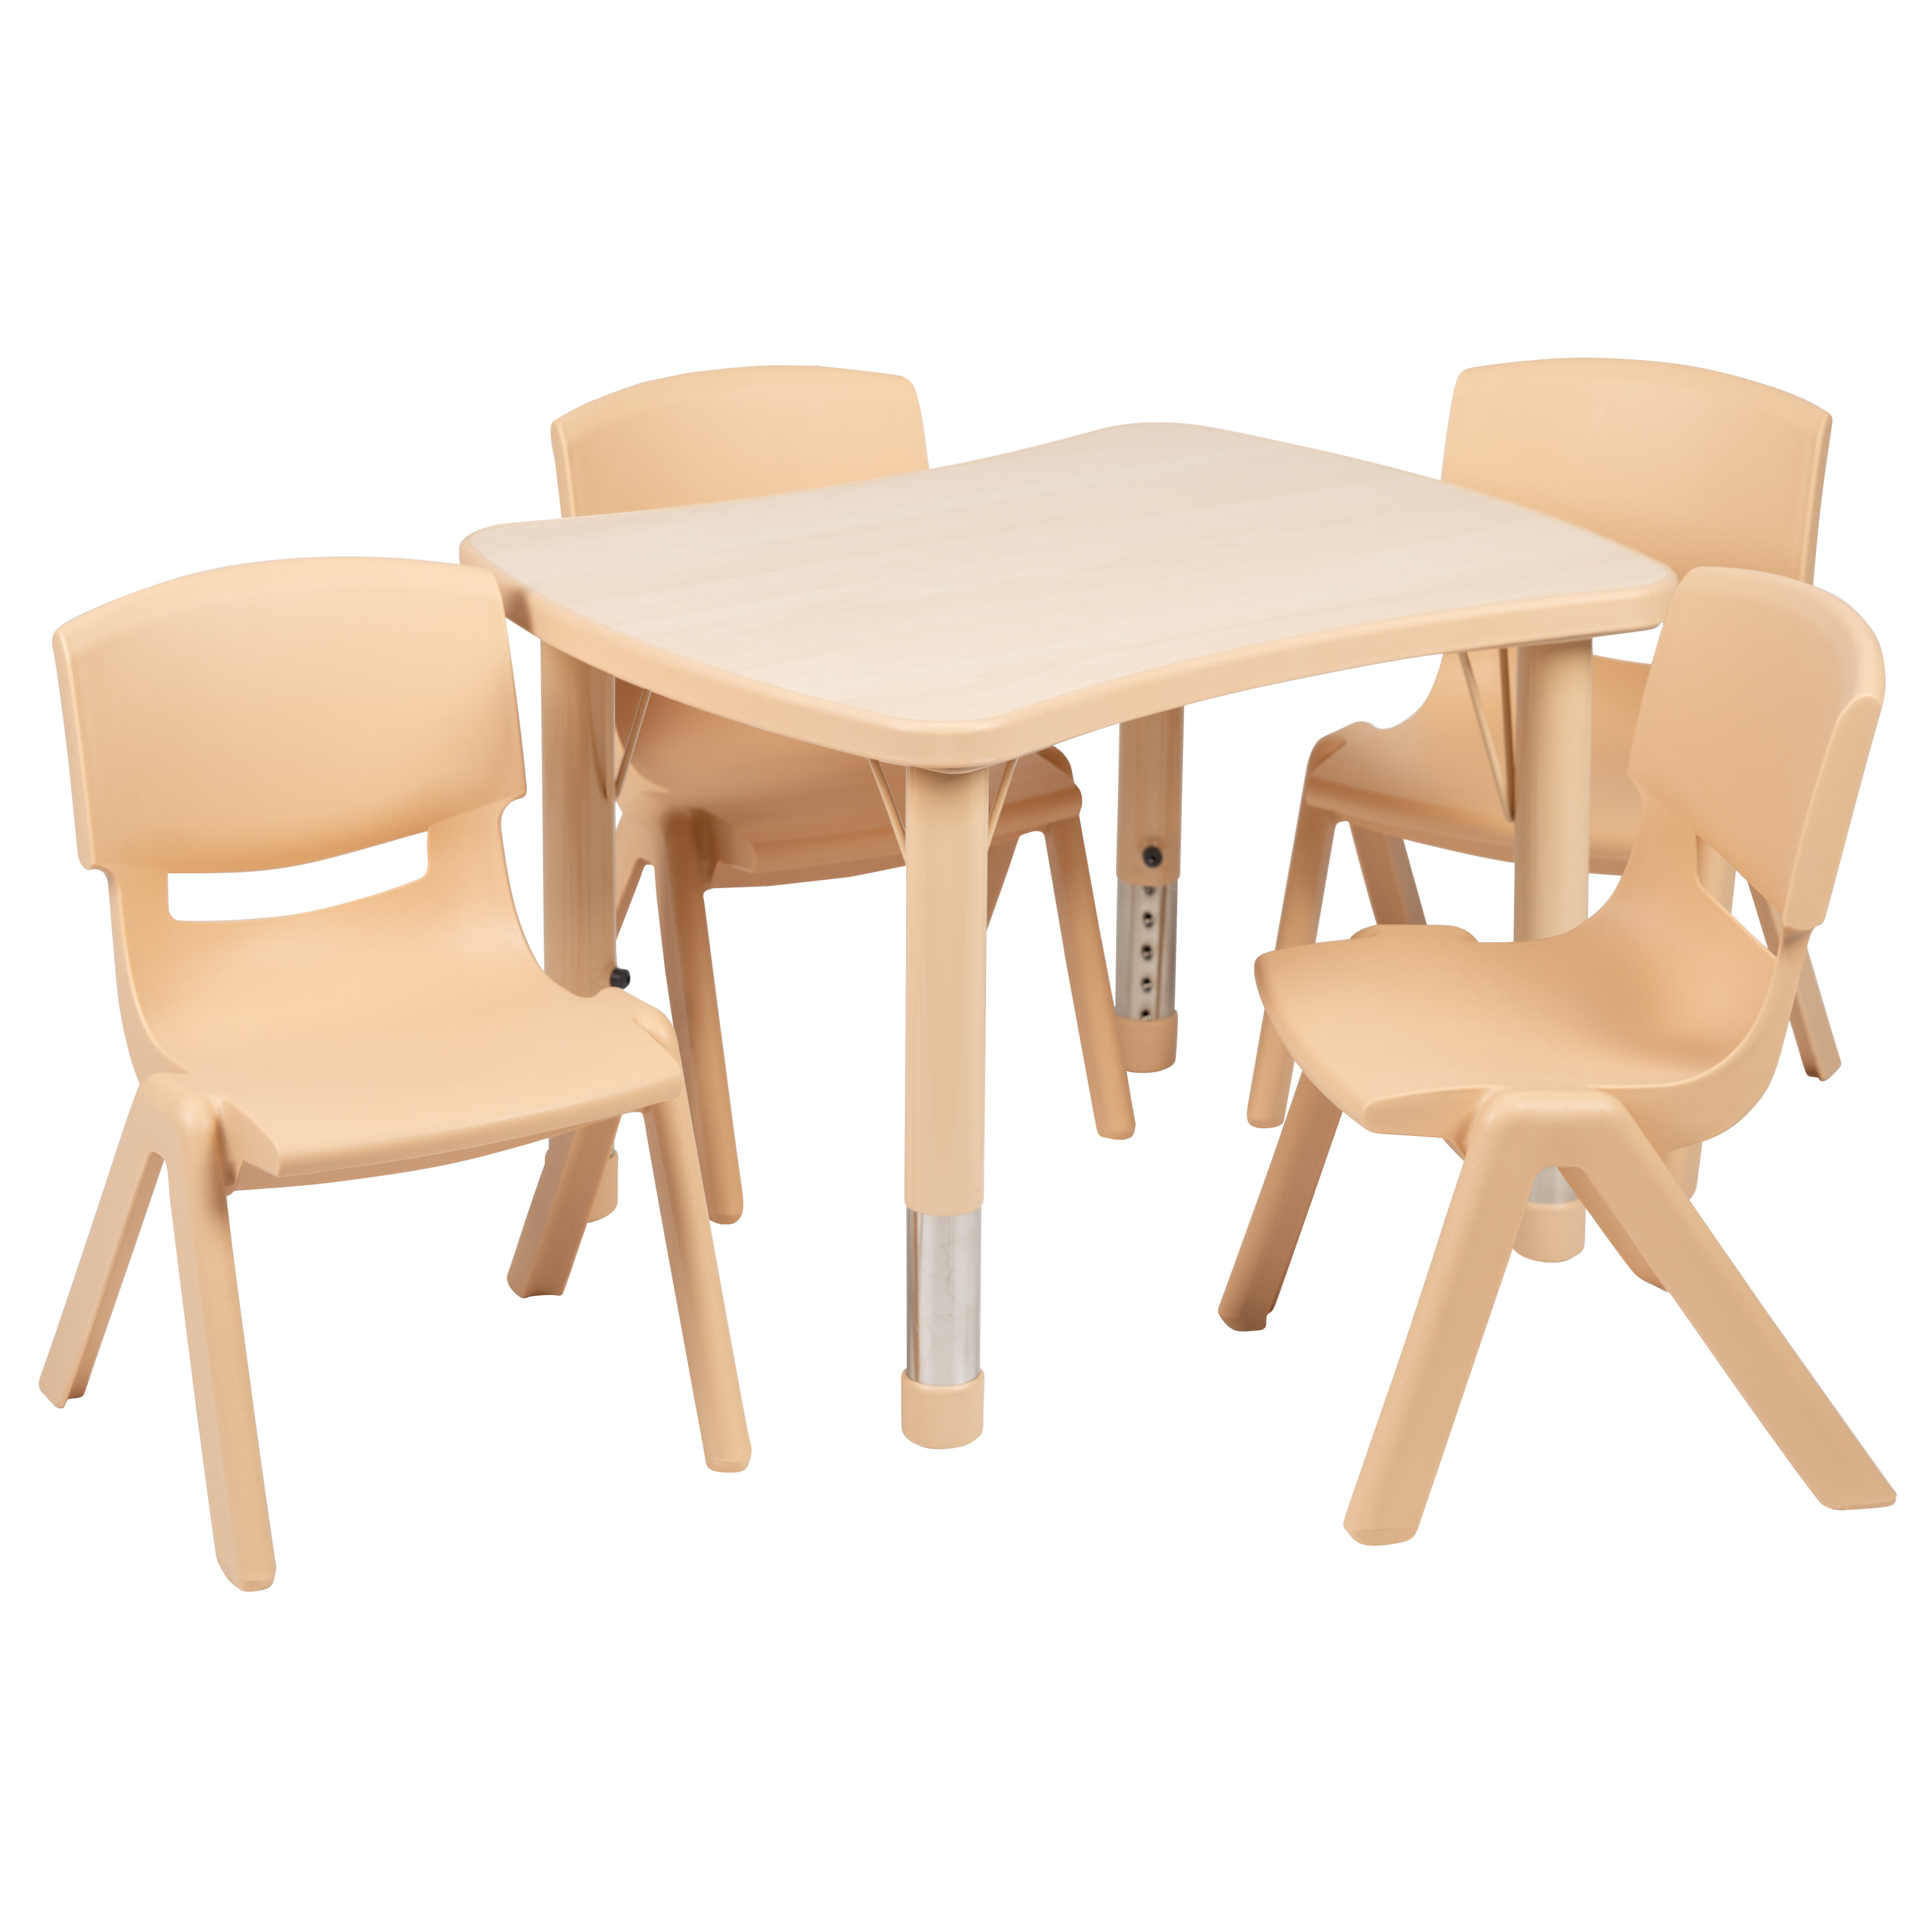 Flash Furniture YU-YCY-098-0034-RECT-TBL-NAT-GG 21.875"W x 26.625"L Rectangular Natural Plastic Height Adjustable Activity Table with 4 Chairs